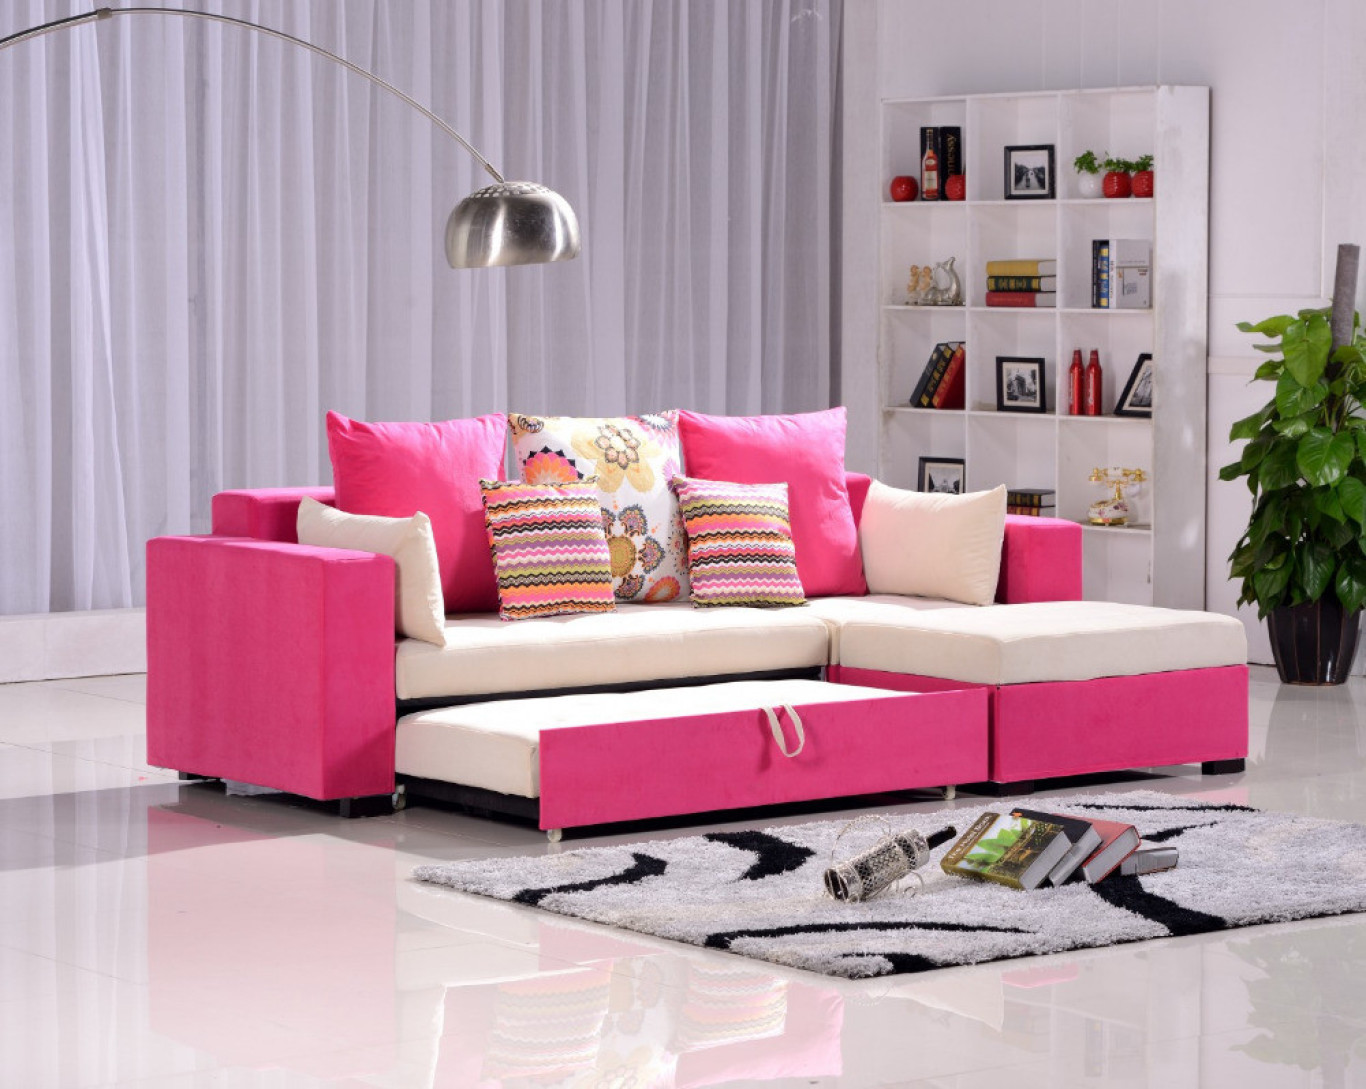 Pink Living Room Chair
 Living Room Decor Using Gray And Pink Zoe With Love